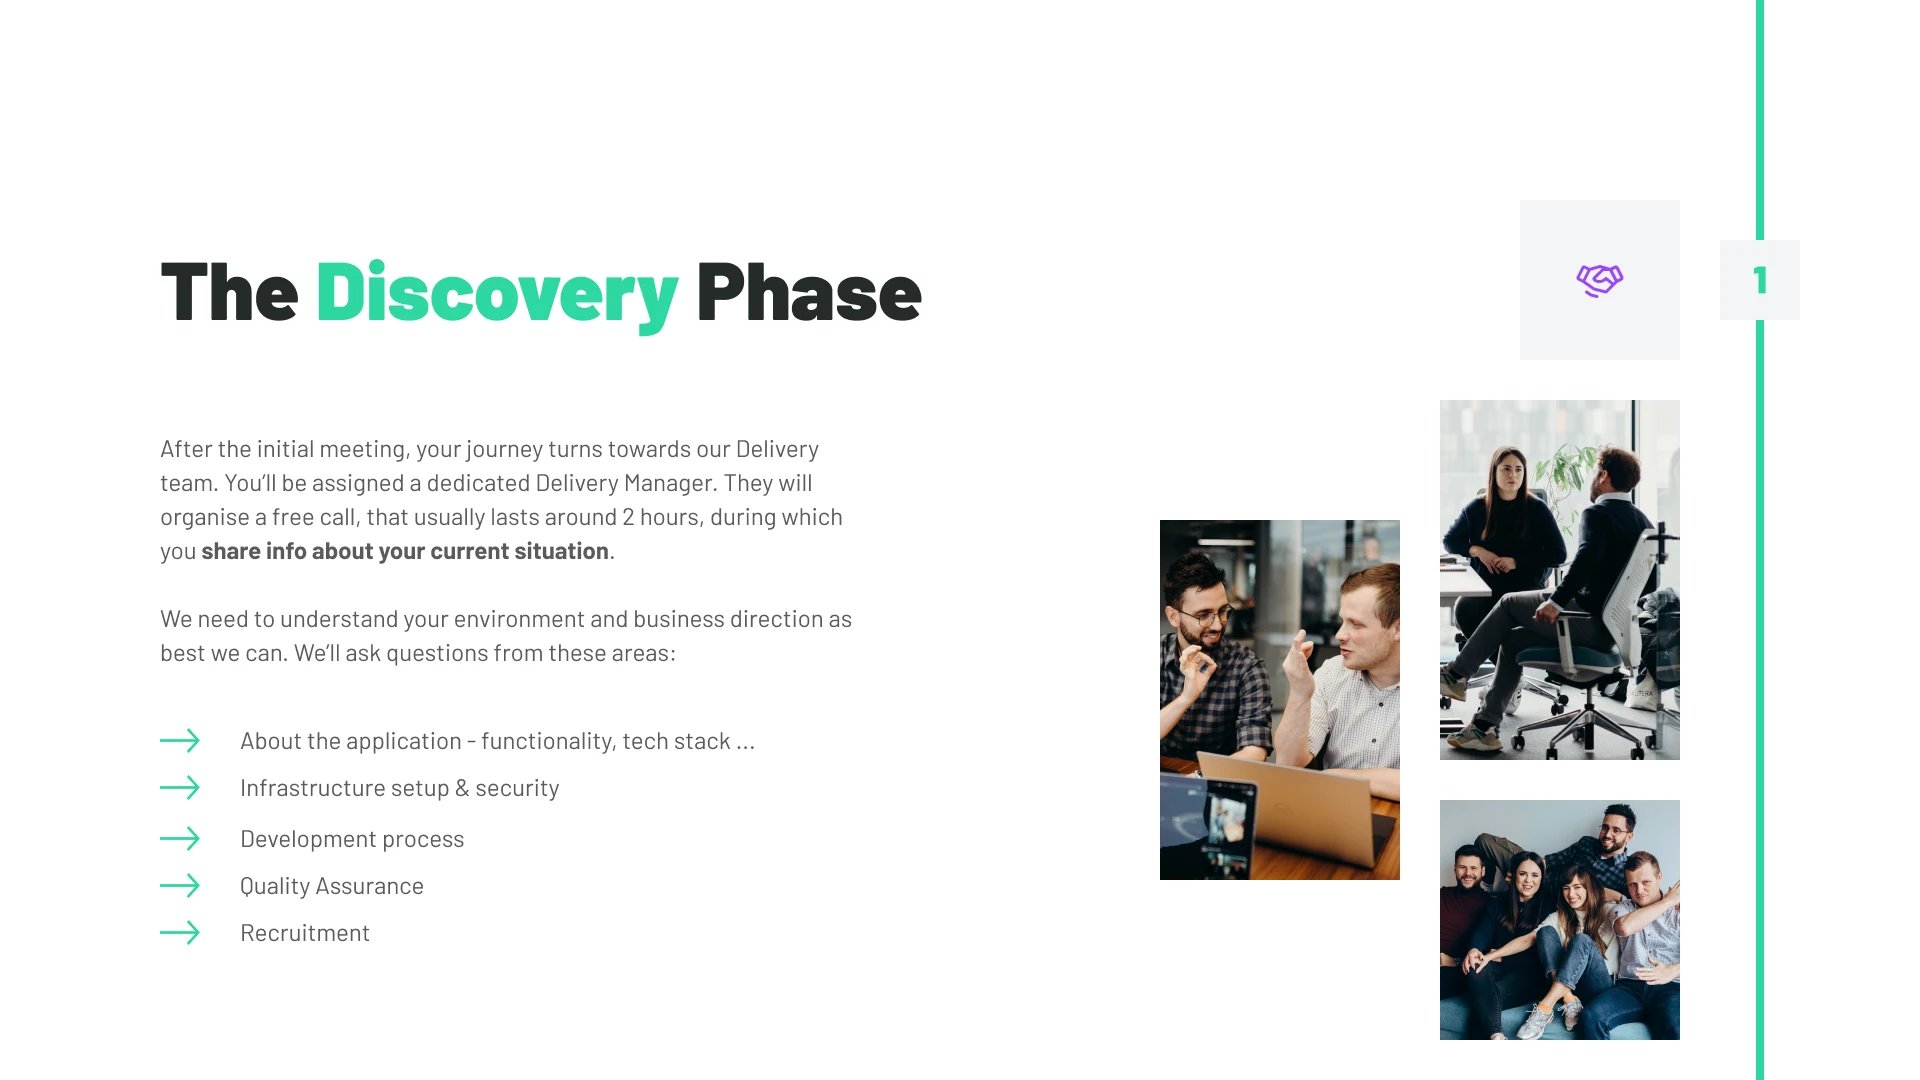 The Discovery Phase